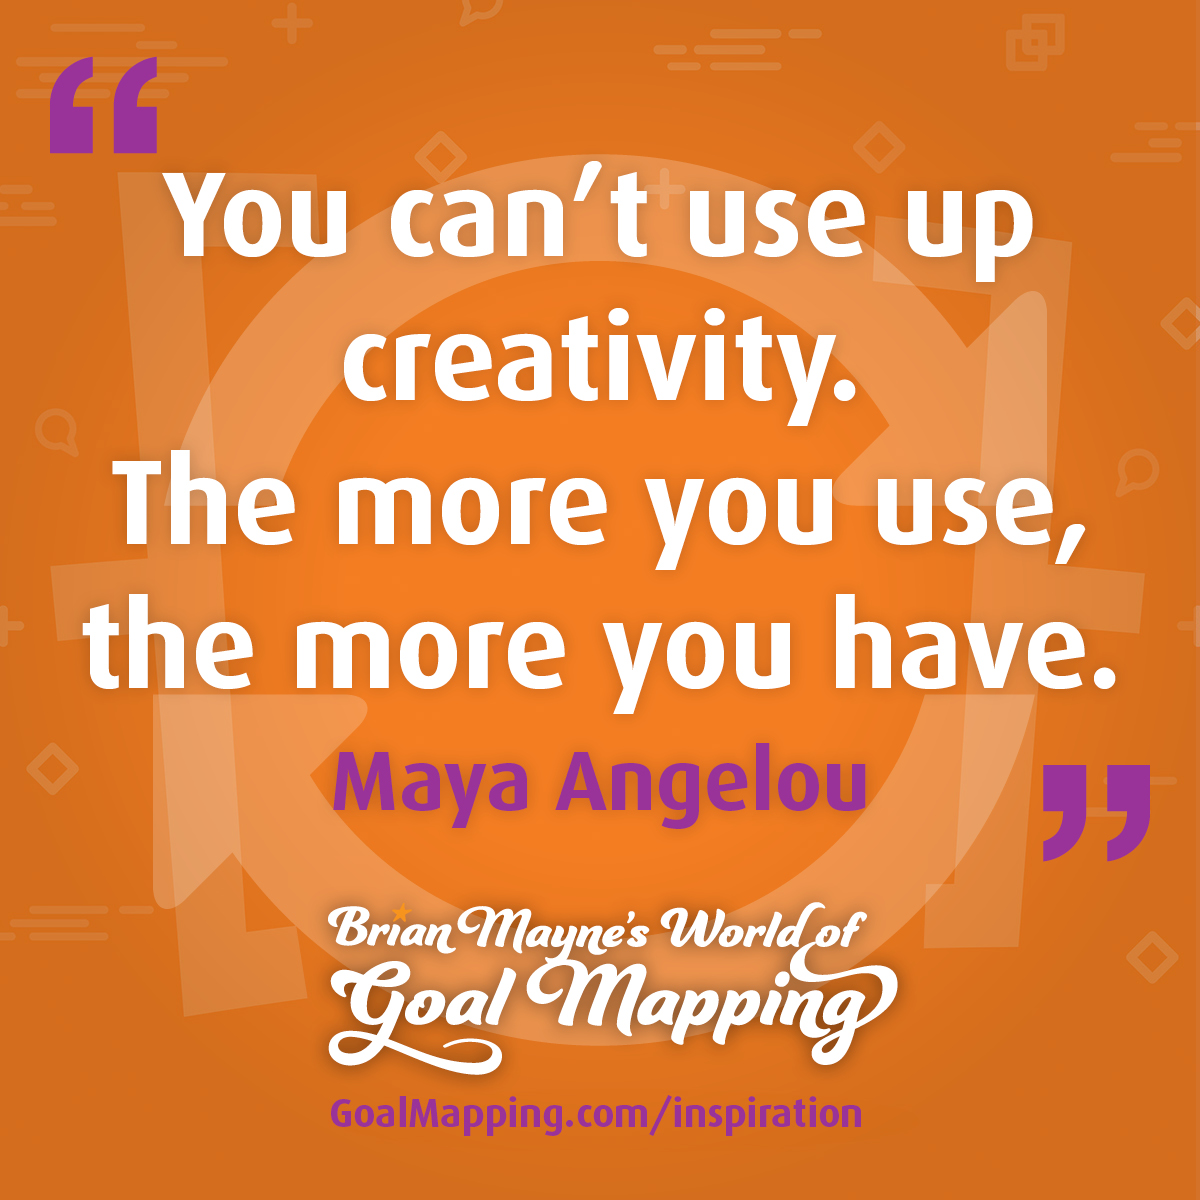 "You can’t use up creativity. The more you use, the more you have." Maya Angelou